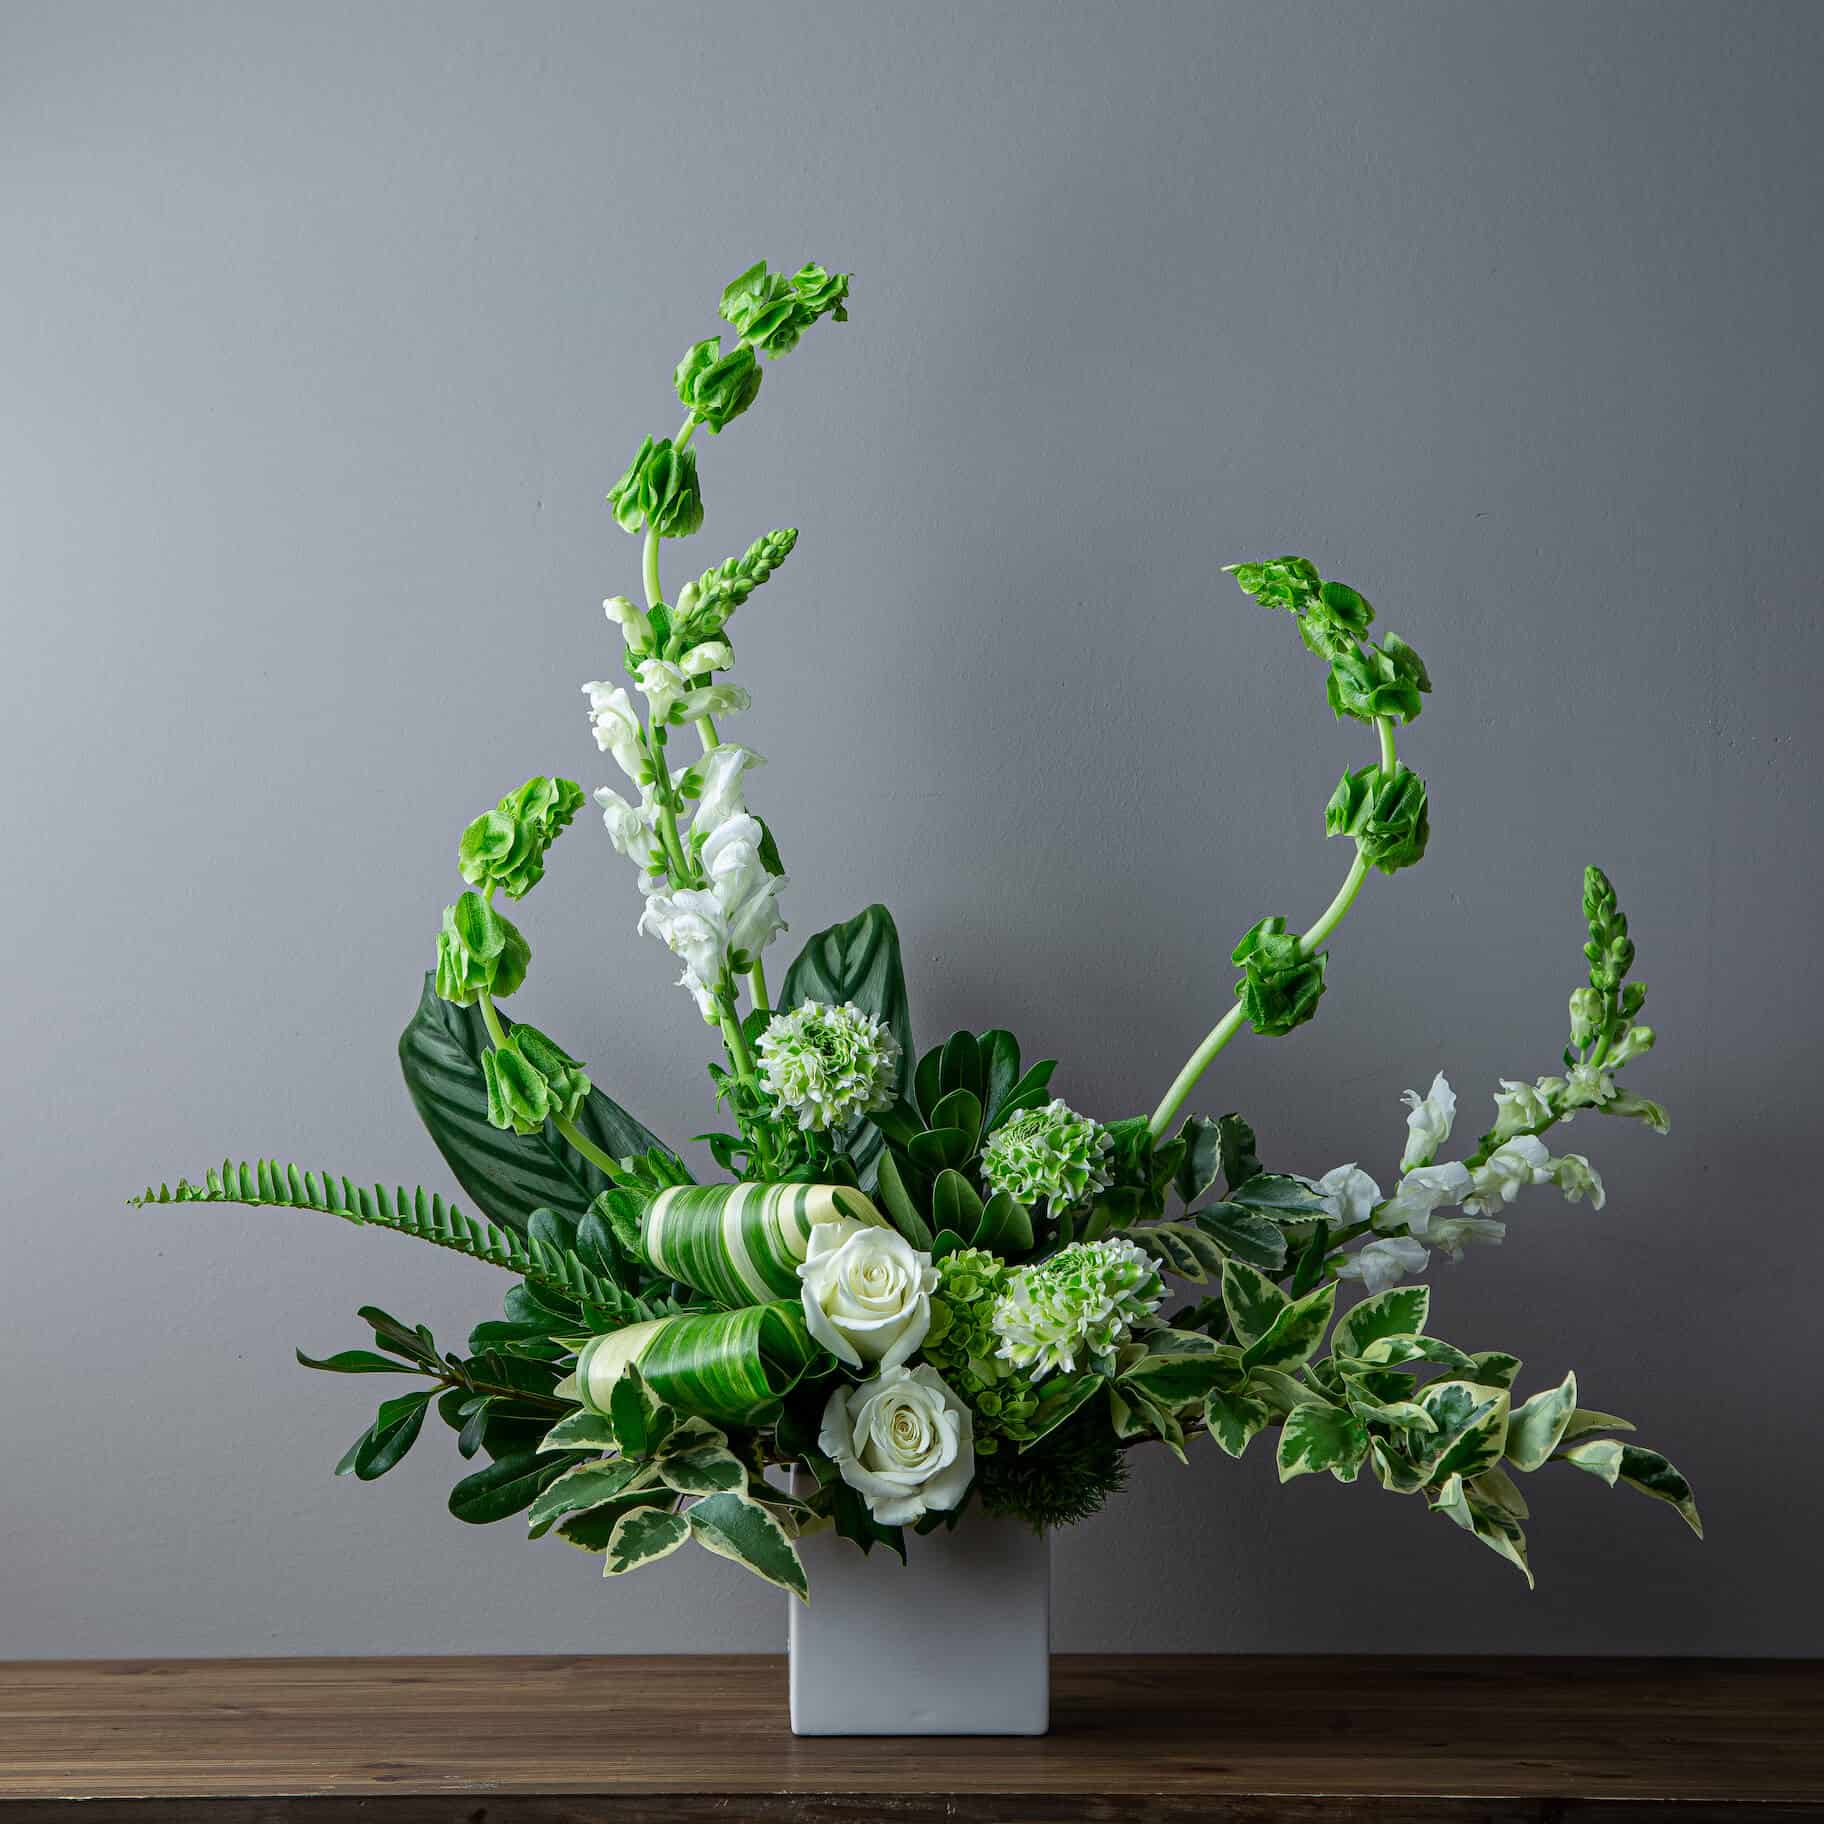 floral arrangement In a white vase with white and green Floral such as White roses, bells of Ireland, and white snapdragons , Ivory Florist offers same day flower delivery in Irvine Ca, best florist in irvine, Number one flower shop in irvine, florist near irvine